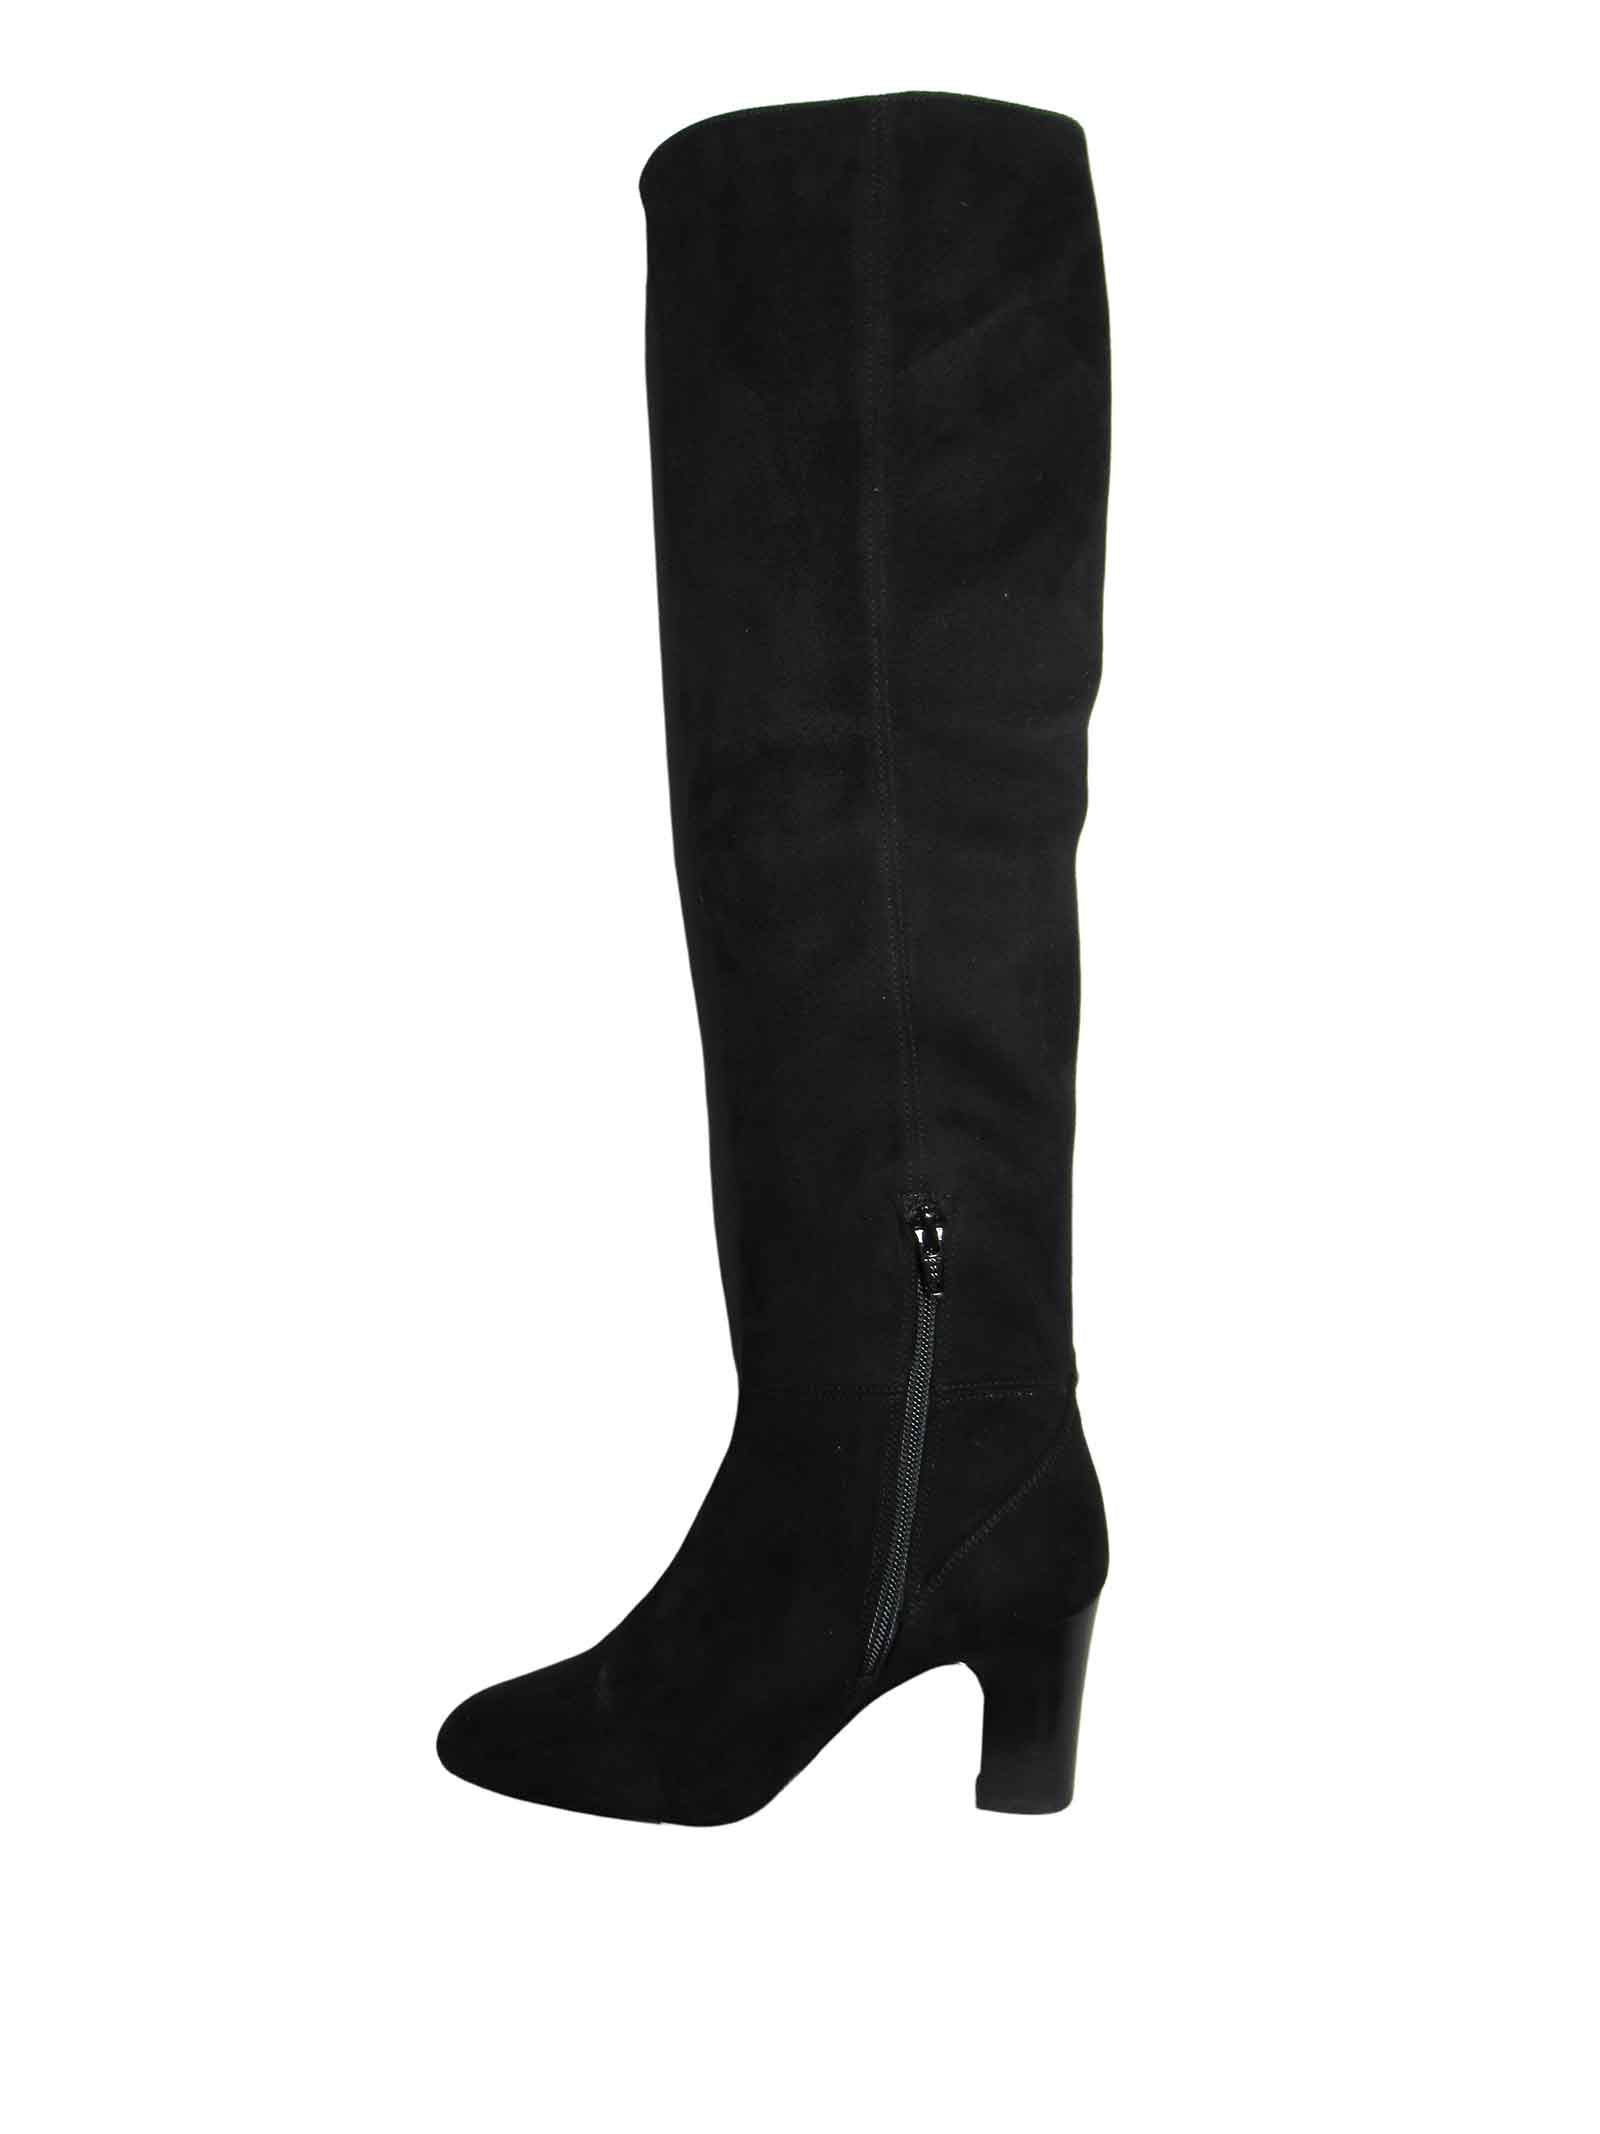 Women's Footwear Over-the-Knee Boots Urica in Black Eco-Suede with High Heel and High Upper